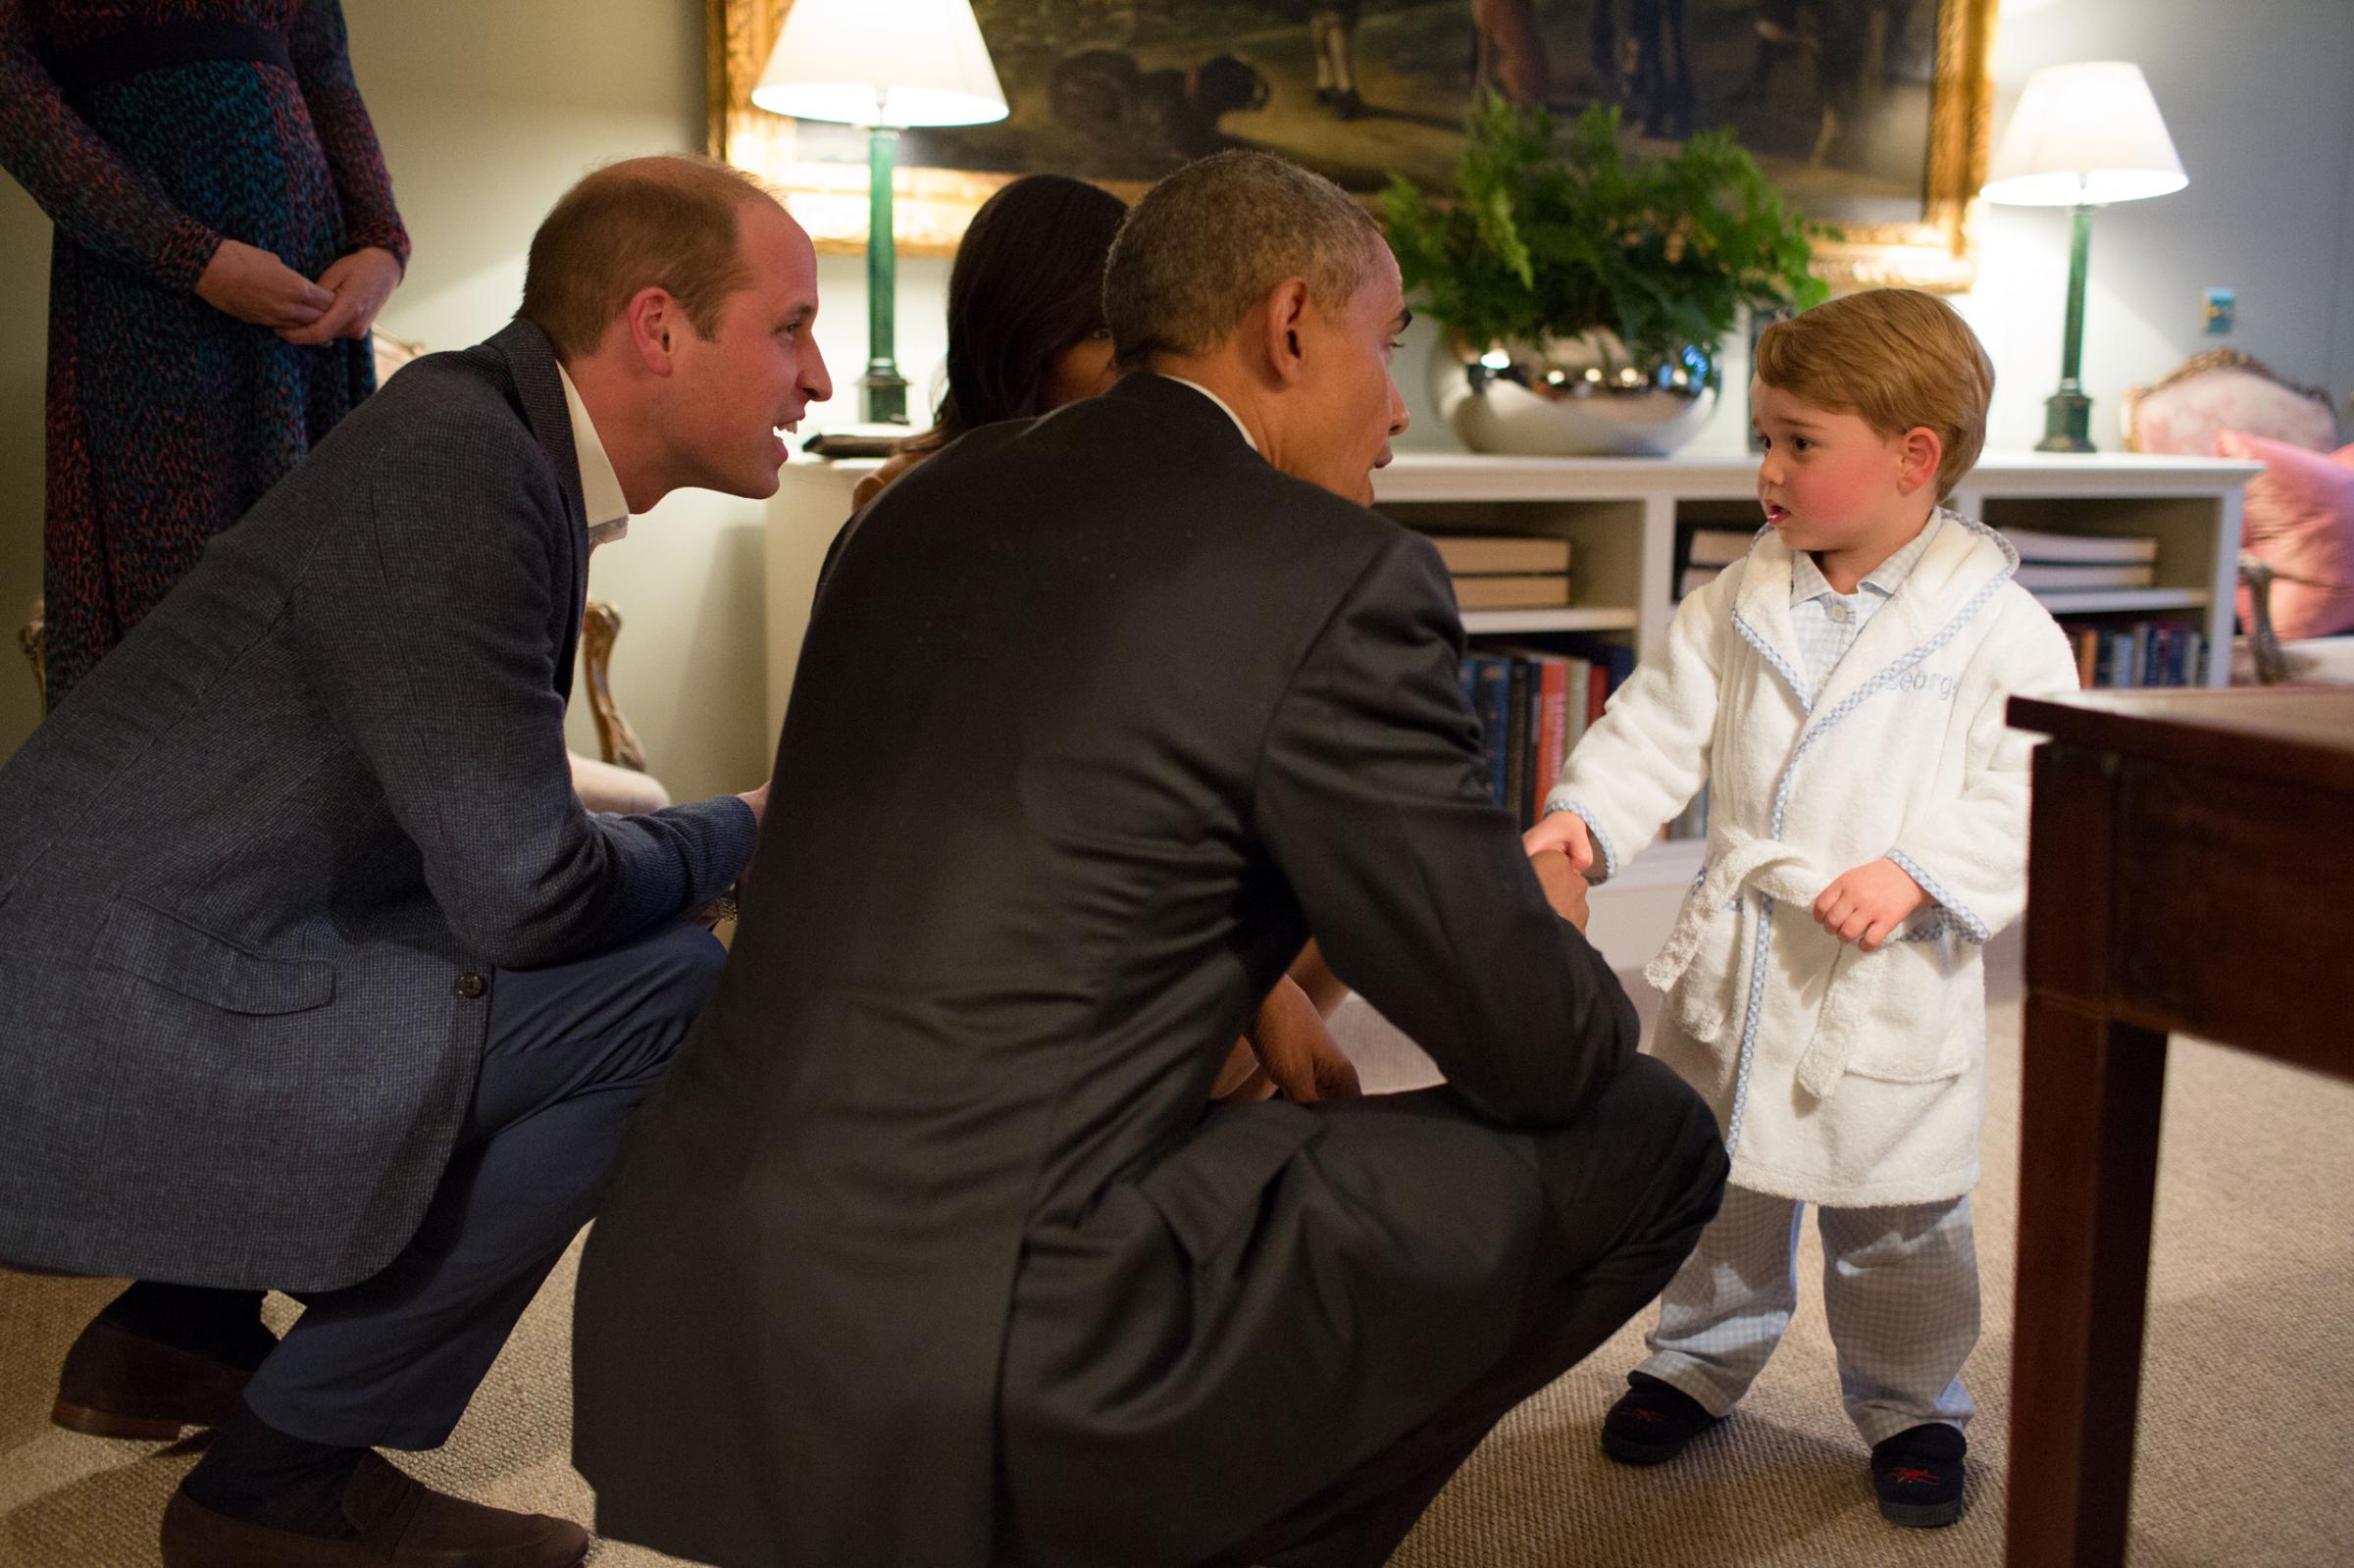 In this official White House photograph, Prince George meets President Obama during a trip to London on April 22, 2016.